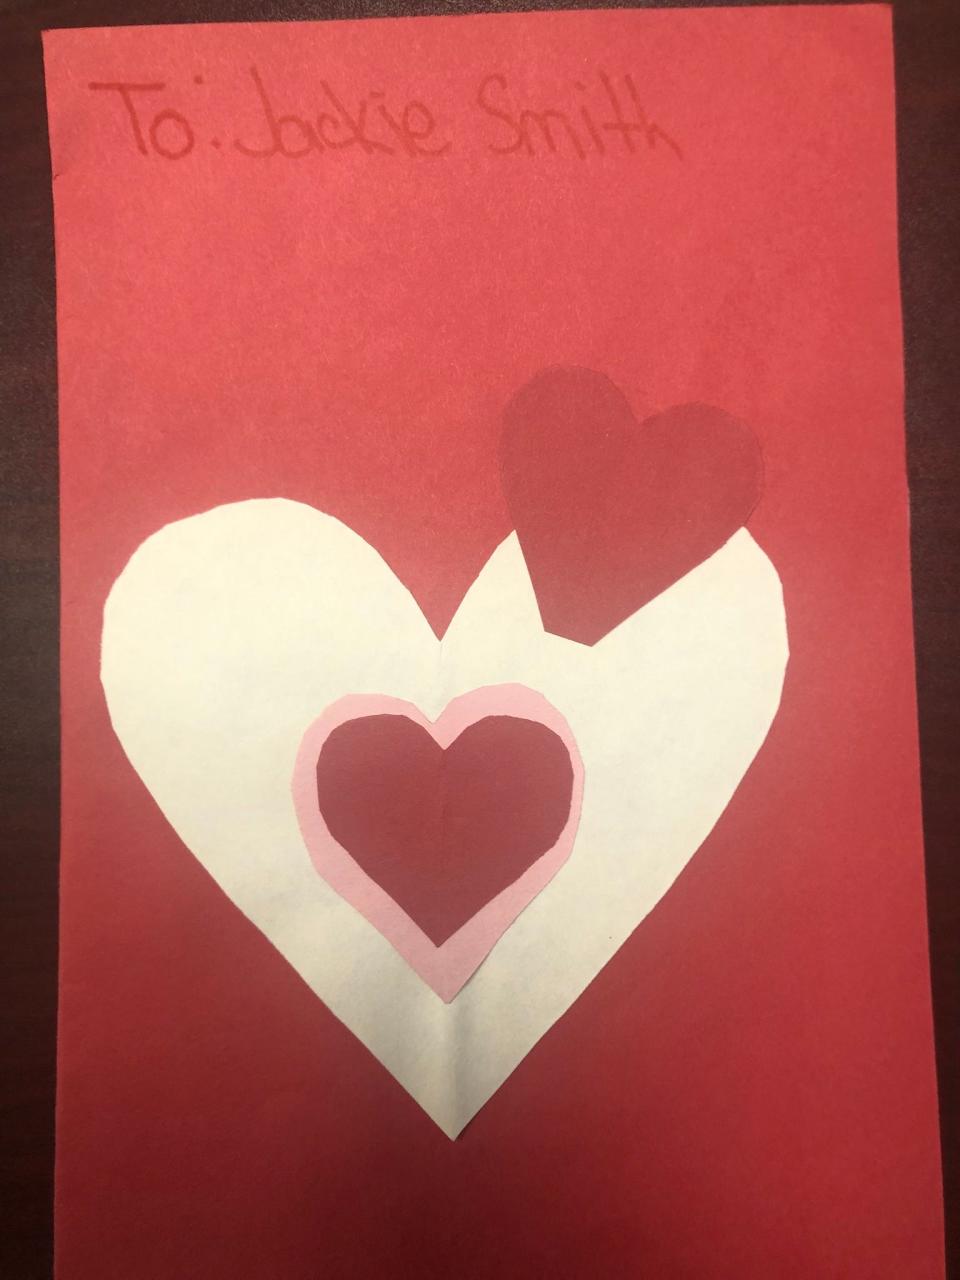 On Wednesday, Feb. 14, from 10 a.m. until 4 p.m., a special Valentine's Day tribute, “Cards and Letters from Home” will be on display at the Texas Panhandle War Memorial and Education Center, honoring Navy Veteran Jackie Smith of Amarillo.